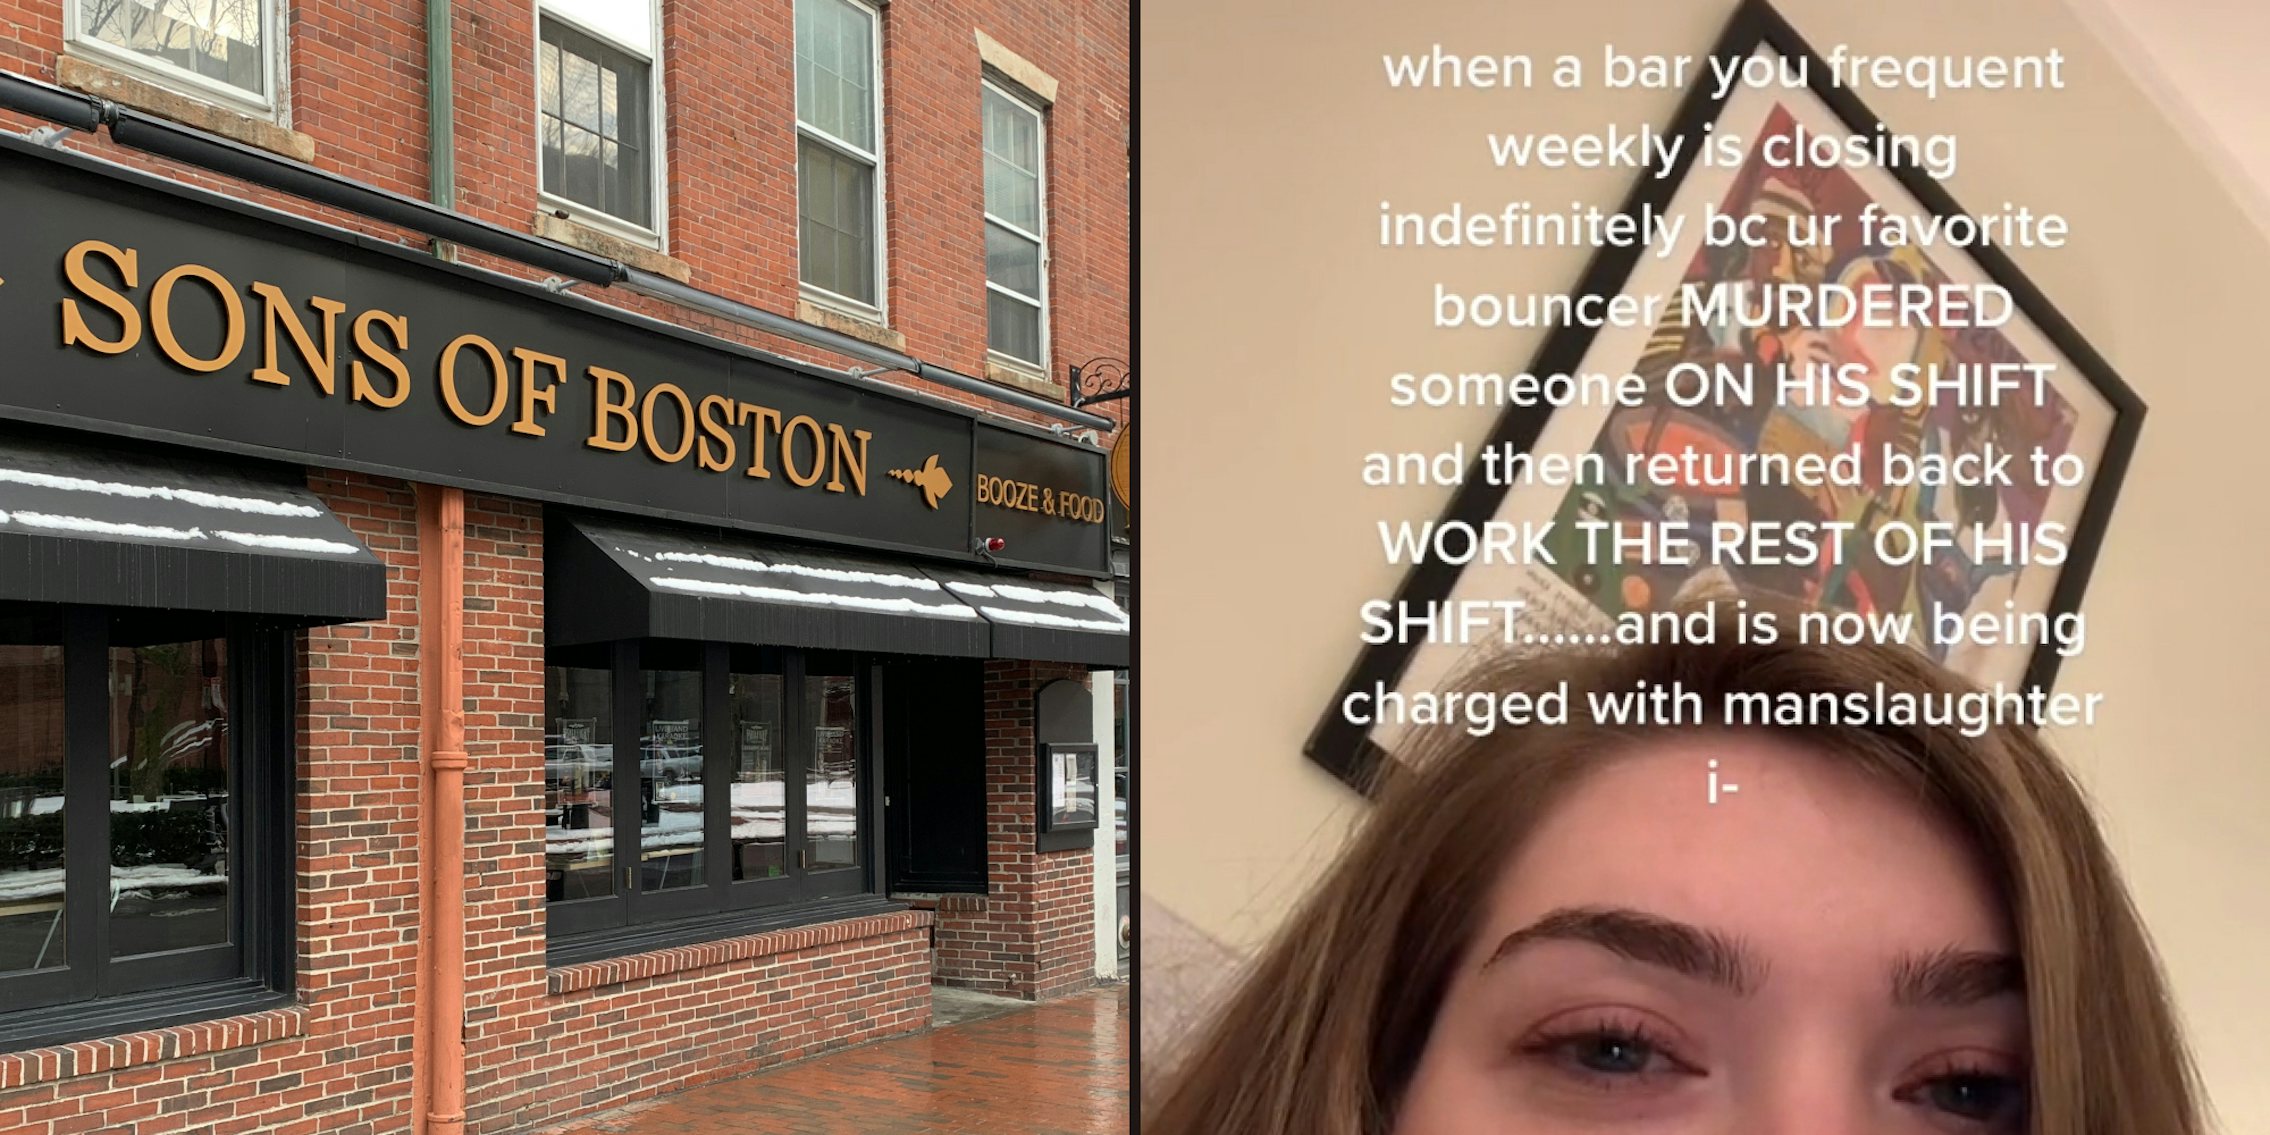 Sons of Boston Booze and Food building with sign (l) Woman eyes caption 'when a bar you frequent weekly is closing bc ur favorite bouncer MURDERED someone ON HIS SHIFT and then returned back too WROK THE REST OF HIS SHIFT... and is now being charged with manslaughter i-' (r)